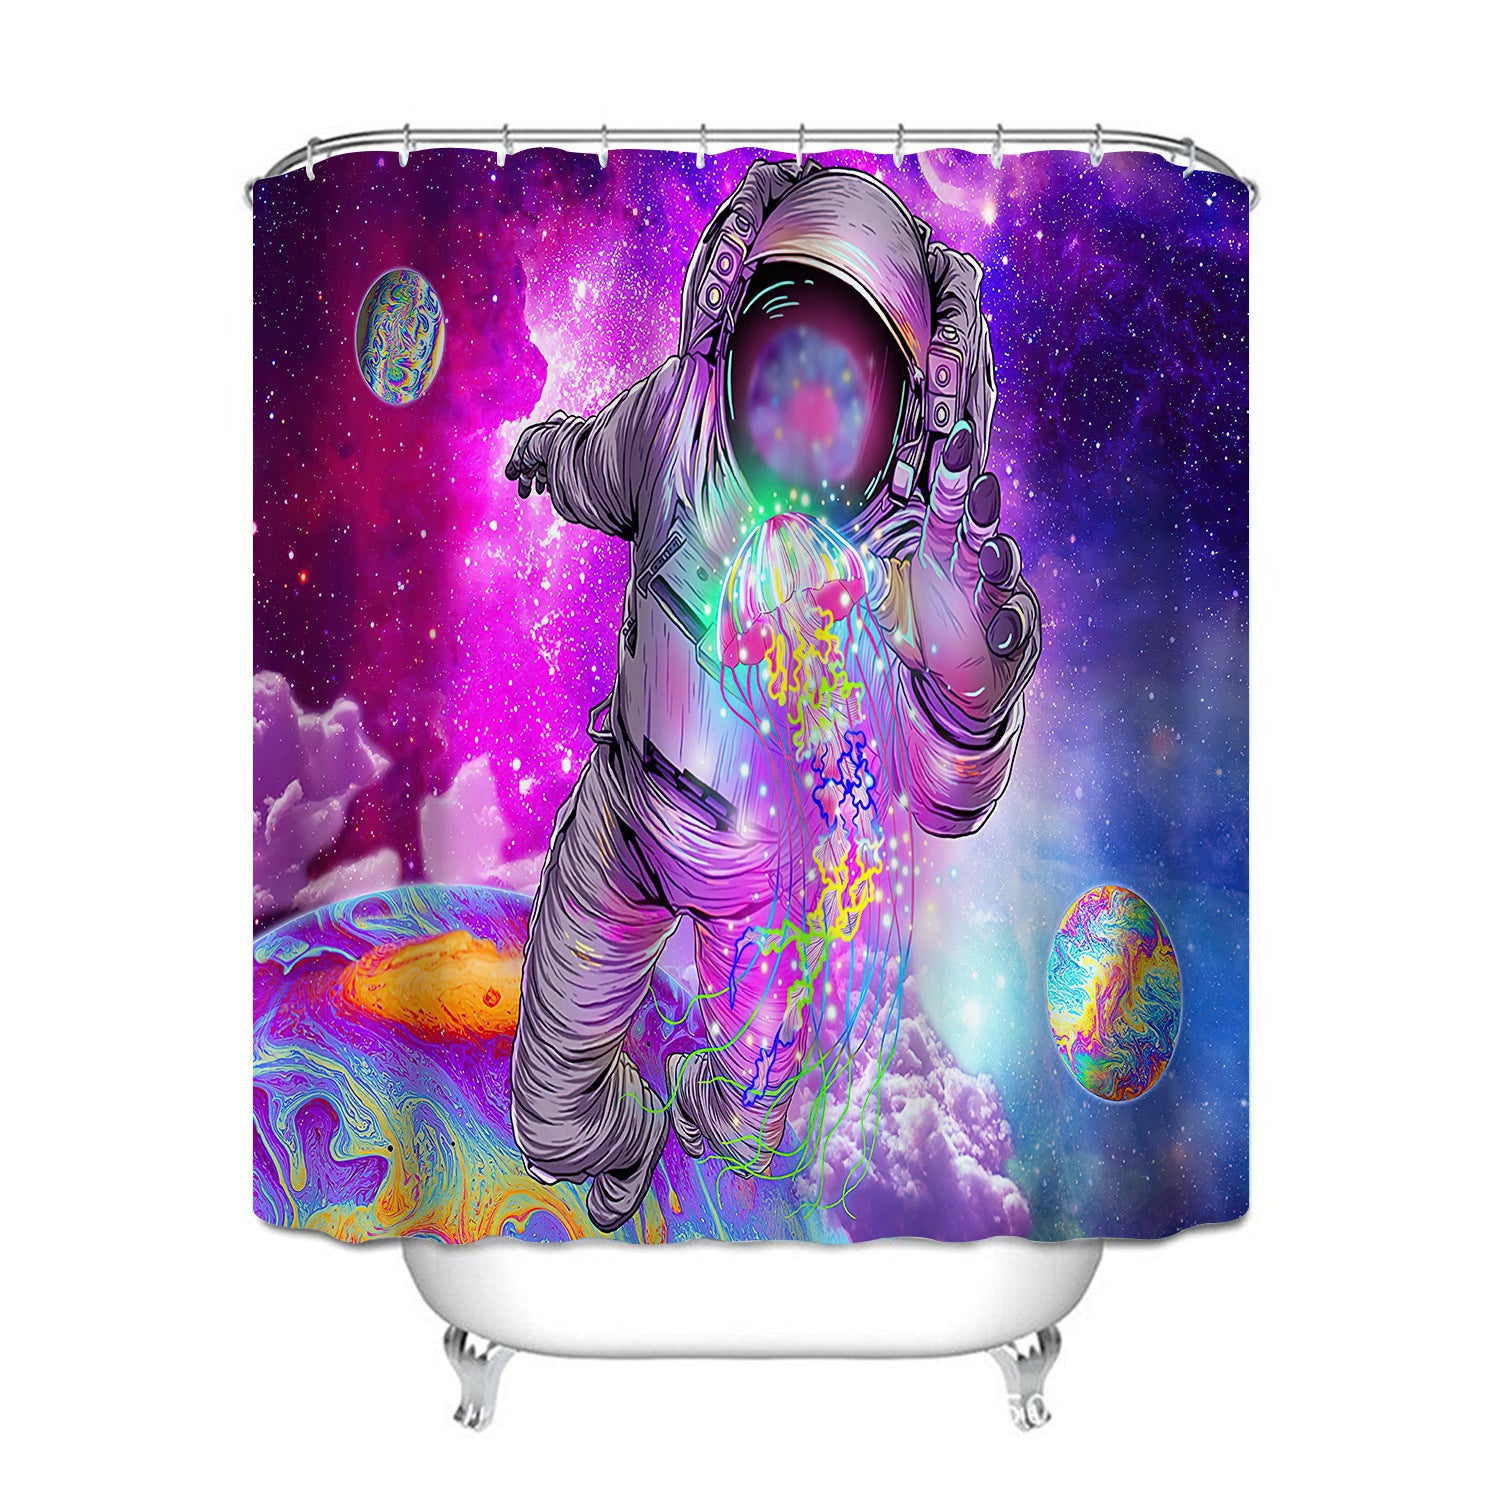 Catching Psychedelic Jellyfish Astronaut Shower Curtain with Dreamy Galaxy Background